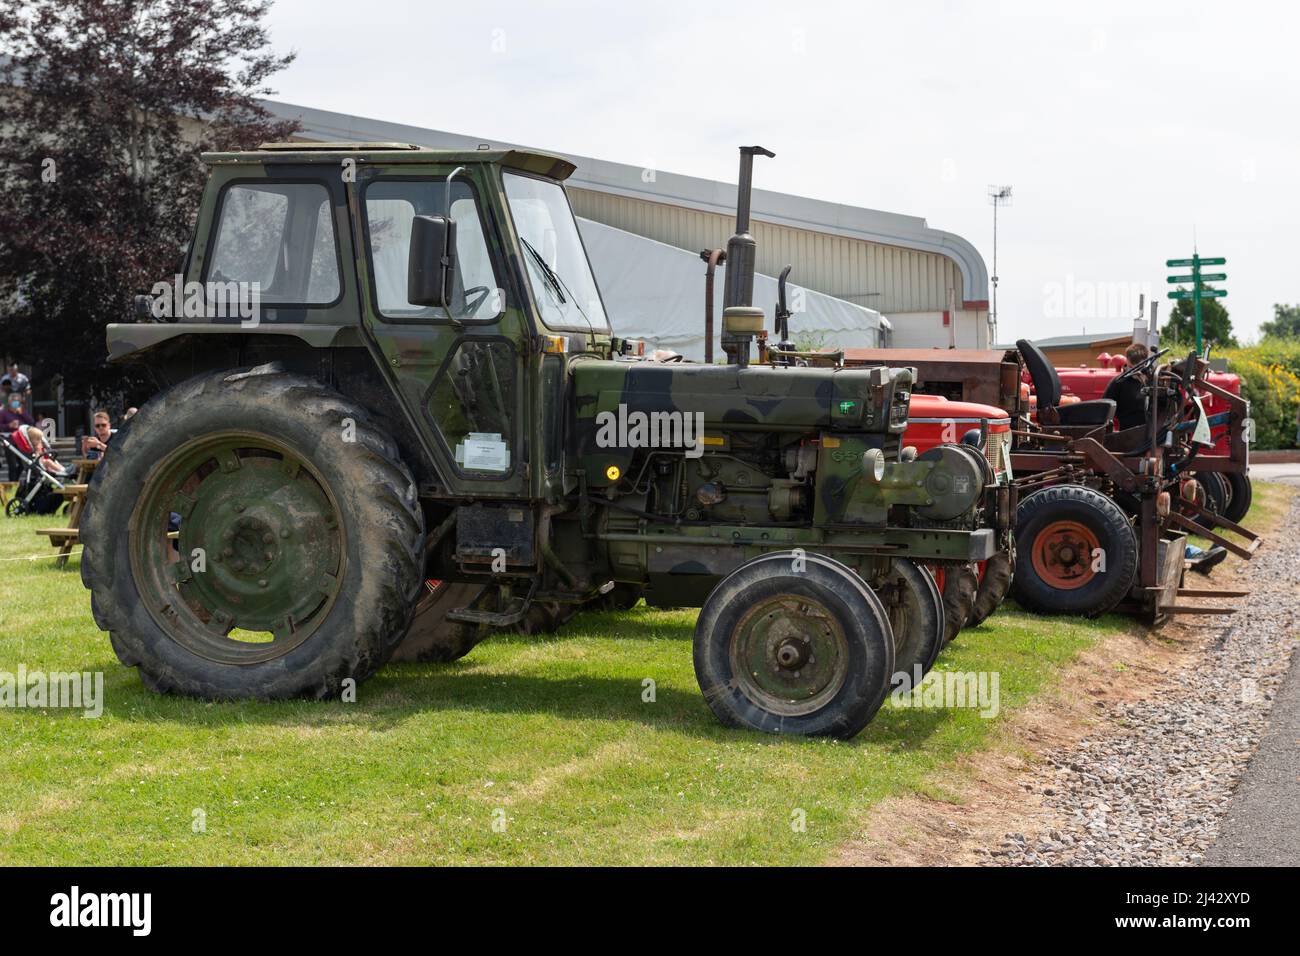 Honiton.Devon.United Kingdom.July 2nd 2021.A Volvo BM T650 tractor formerly used by the Swedish army is on display at the Devon county show Stock Photo